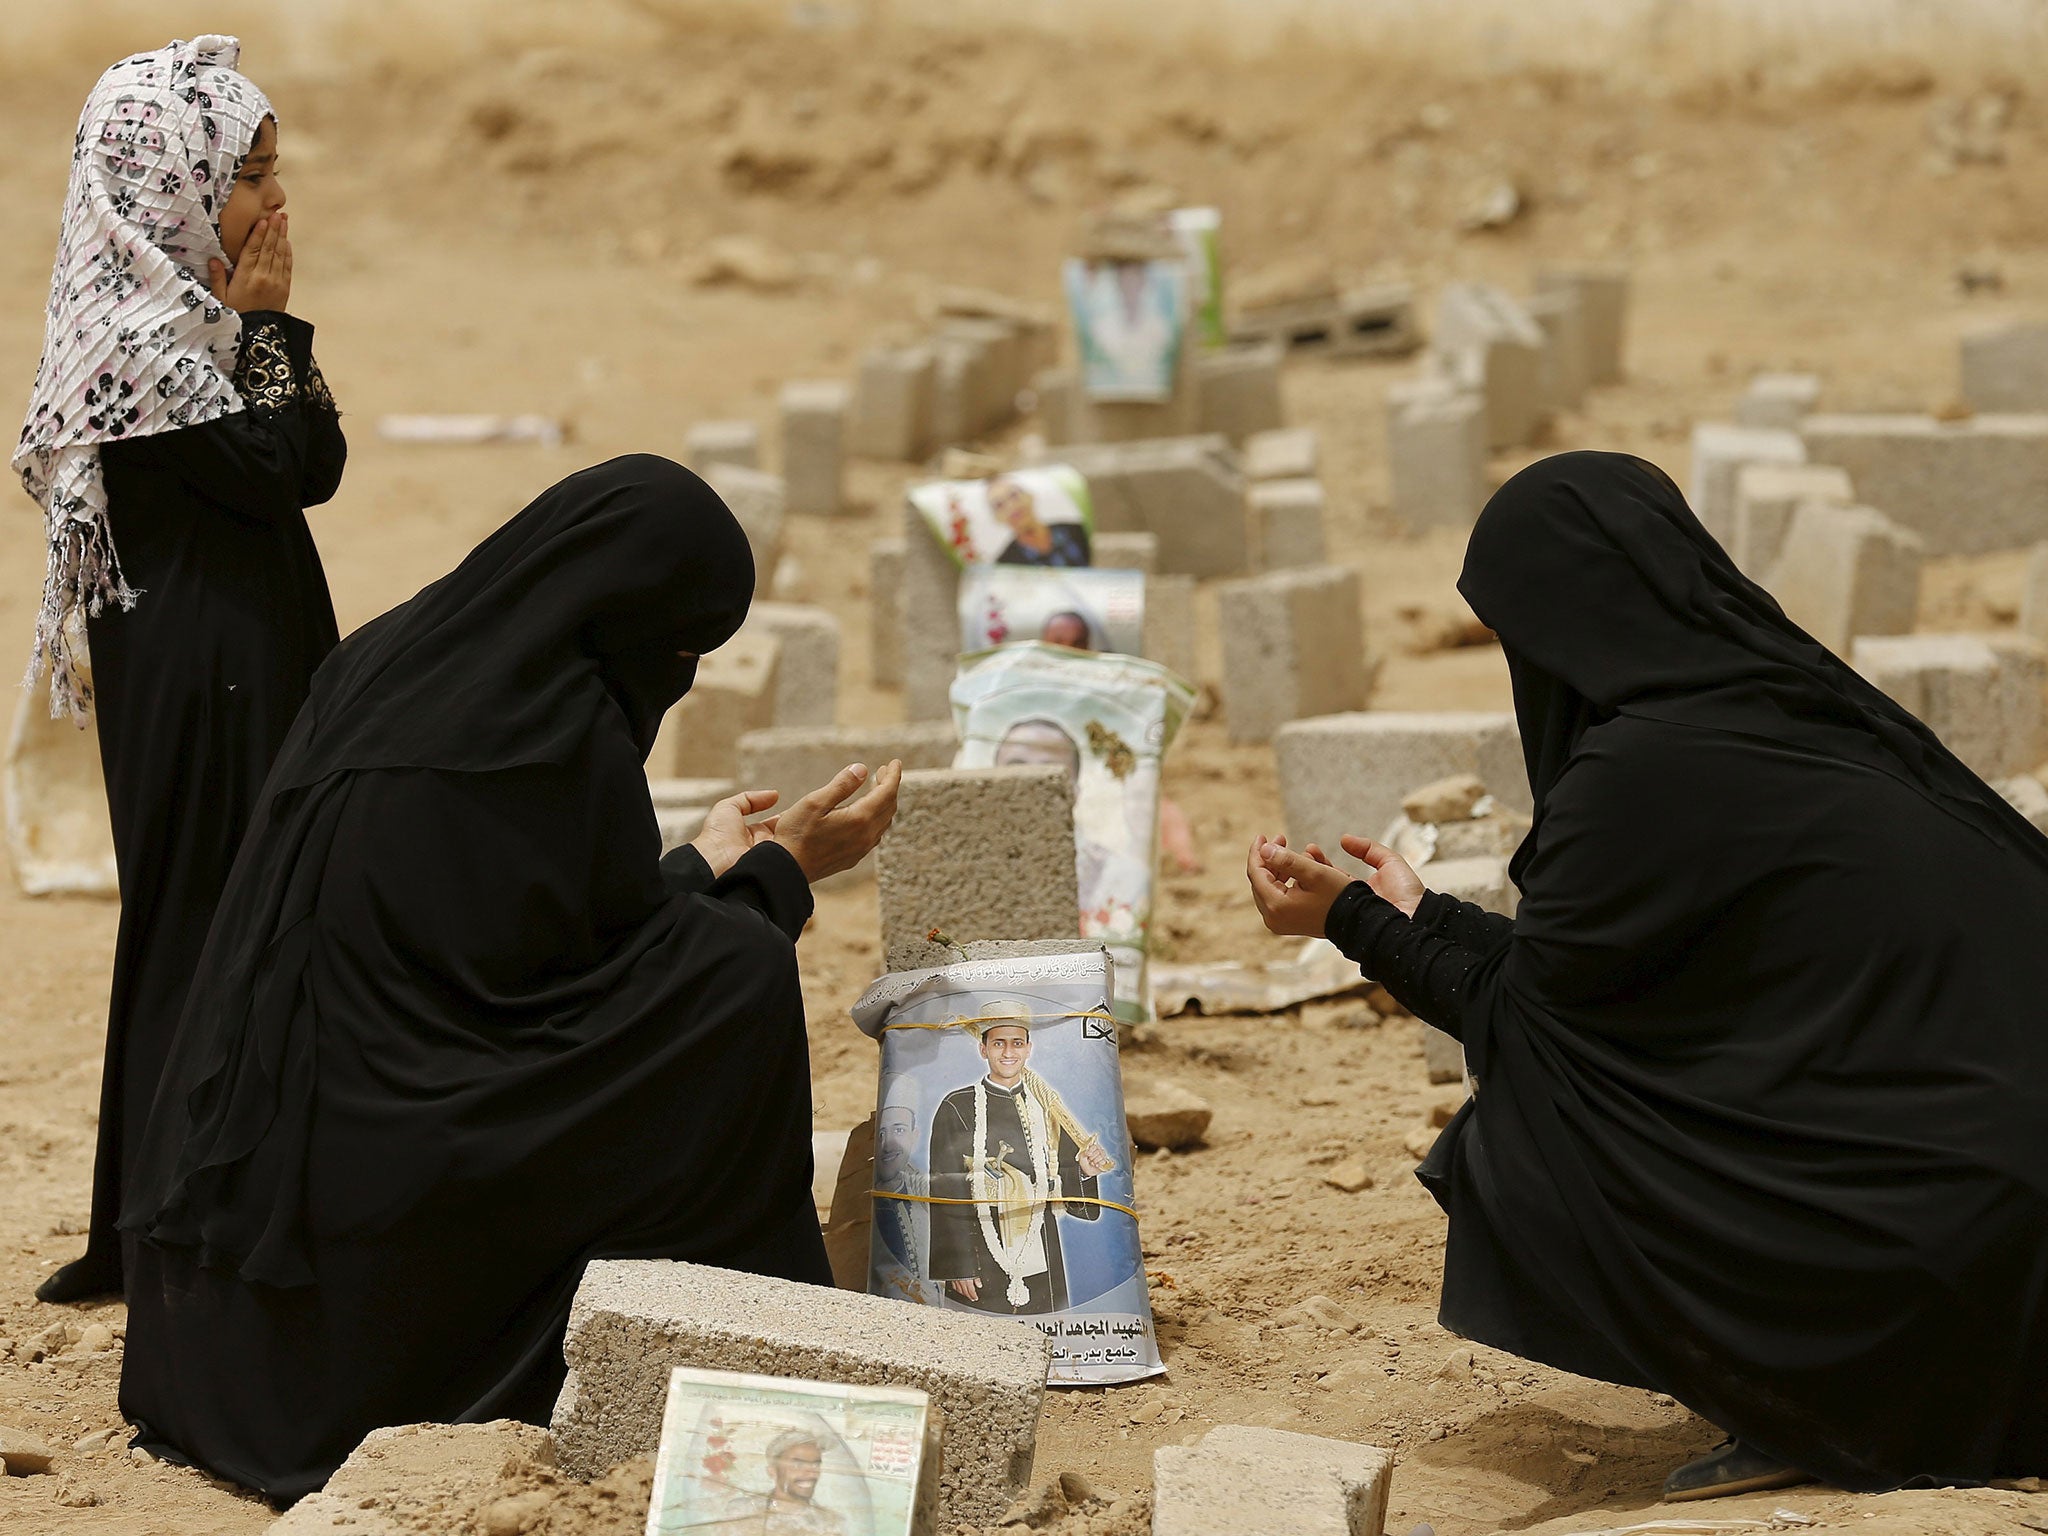 Women pray over the grave of a relative at a cemetery in Sanaa for Houthis killed in Yemen’s conflict